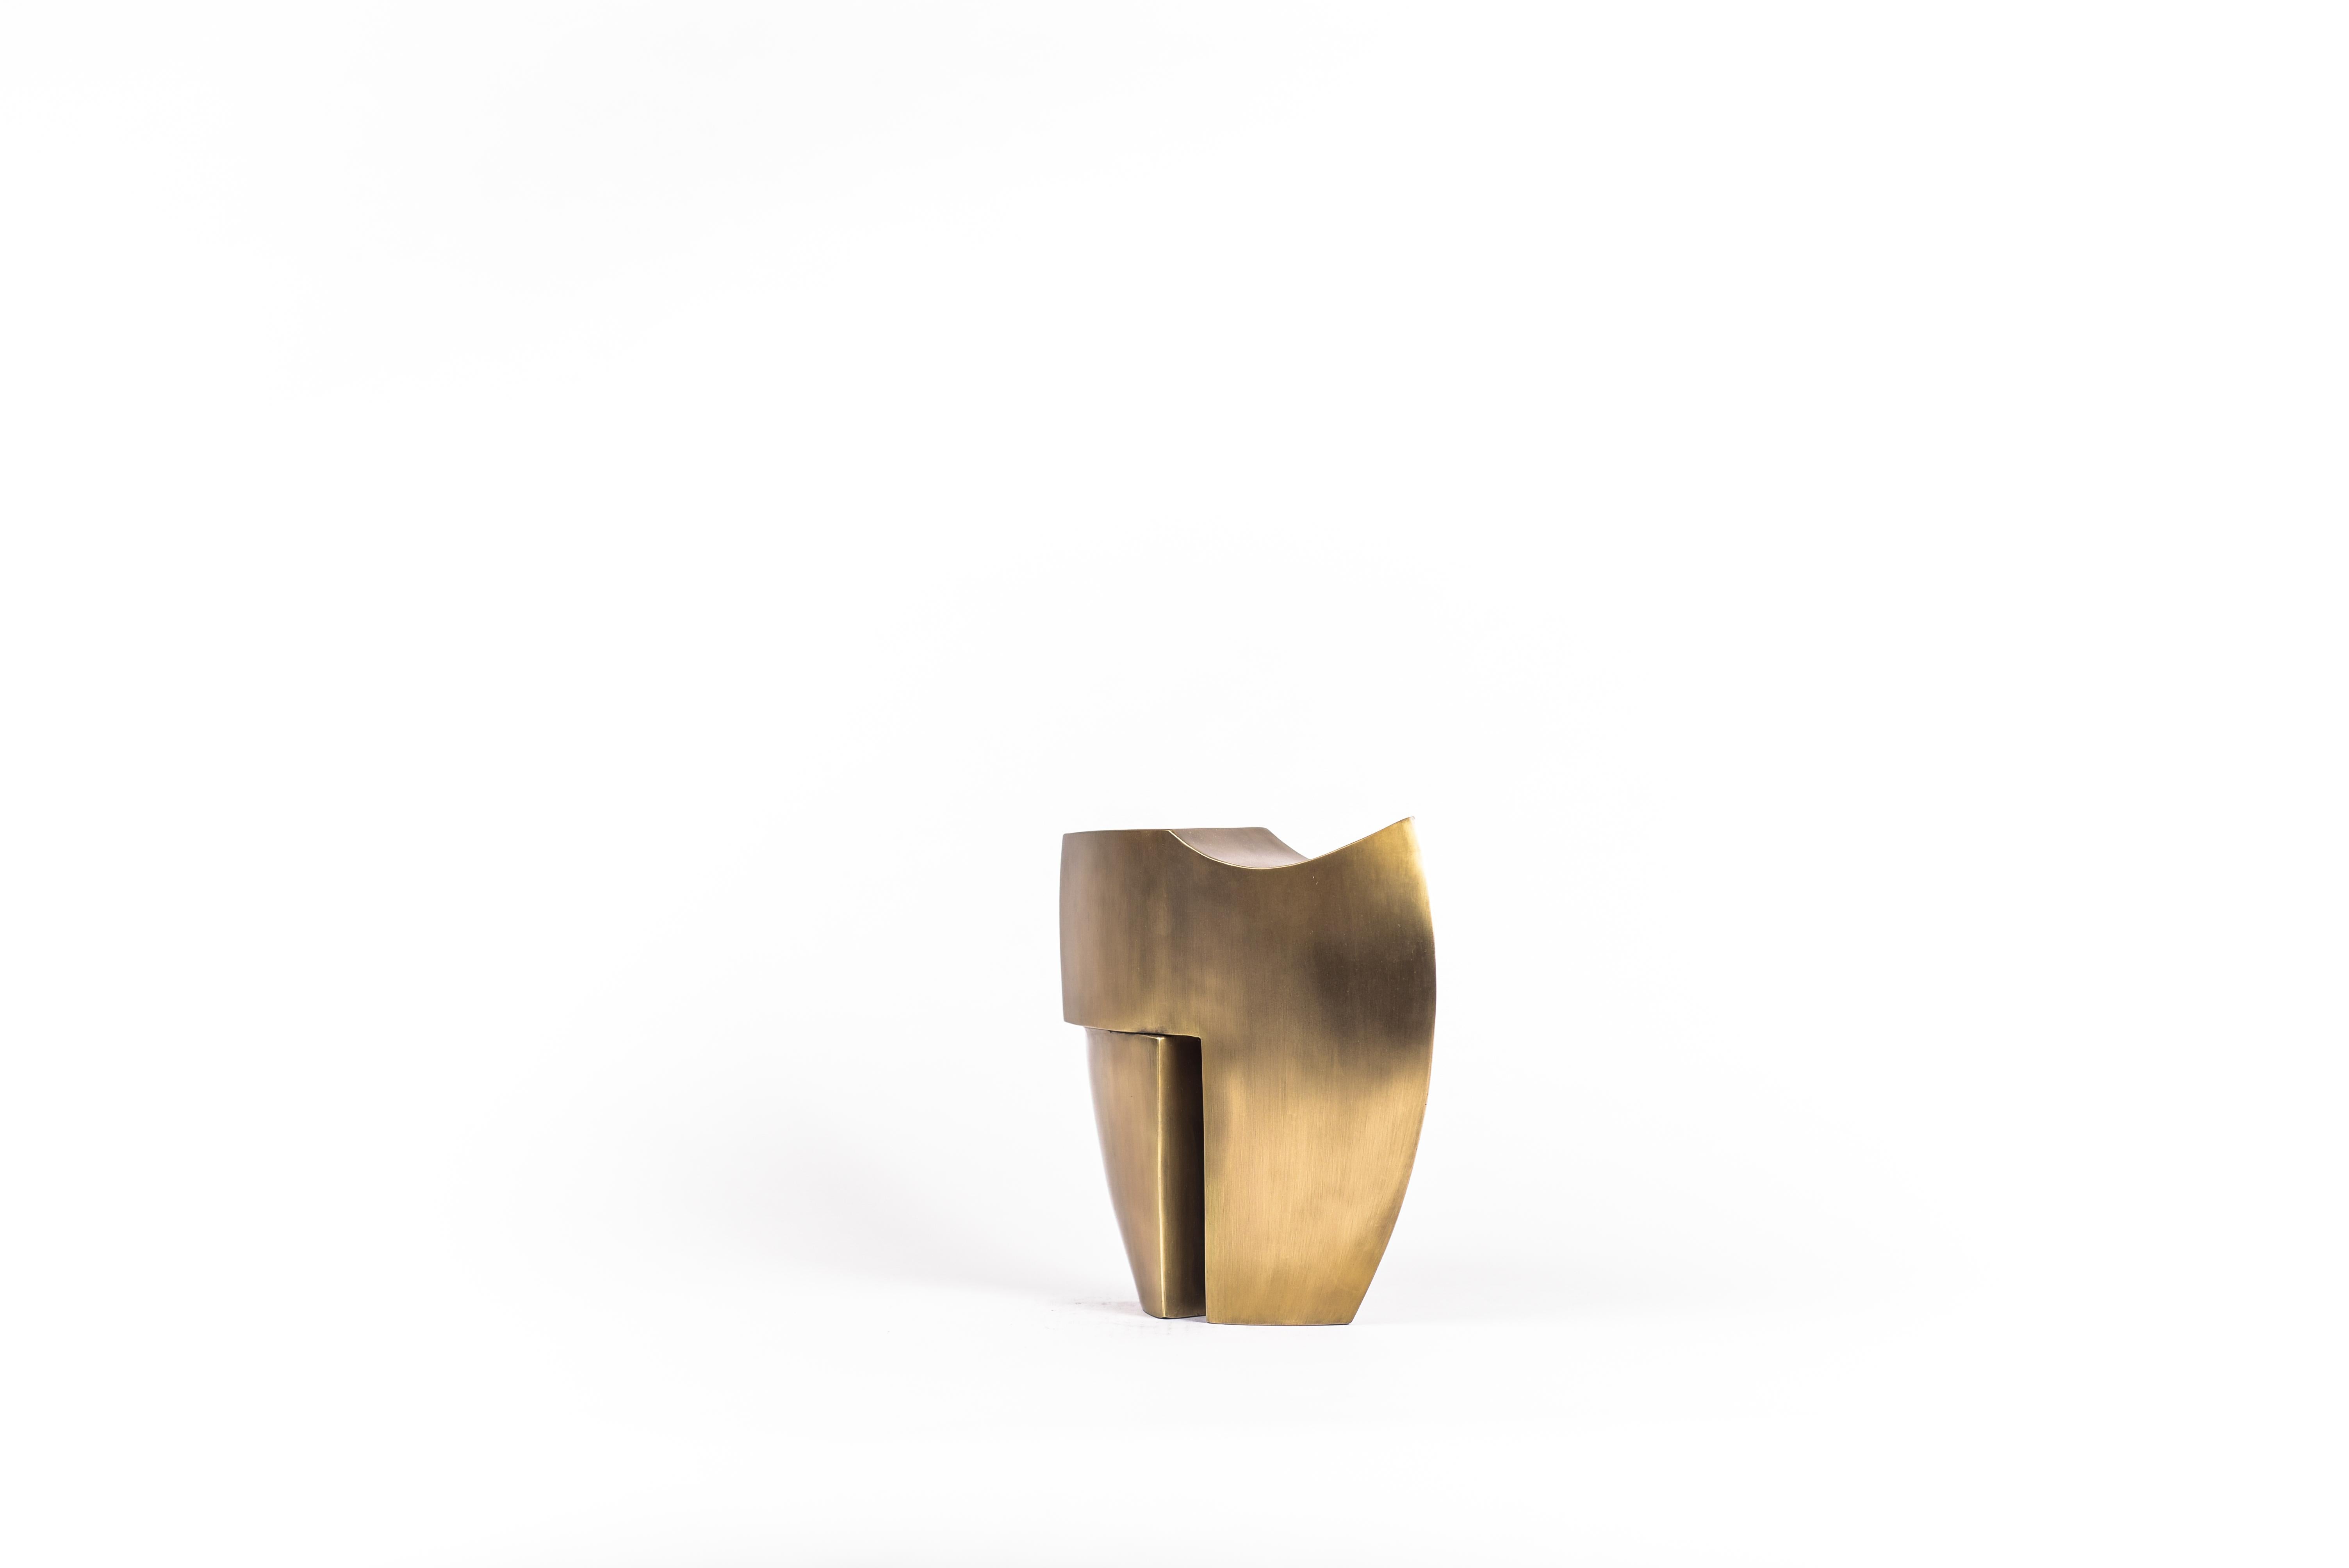 Hand-Crafted Abstract Sculpture in Bronze-Patina Brass by Patrick Coard Paris